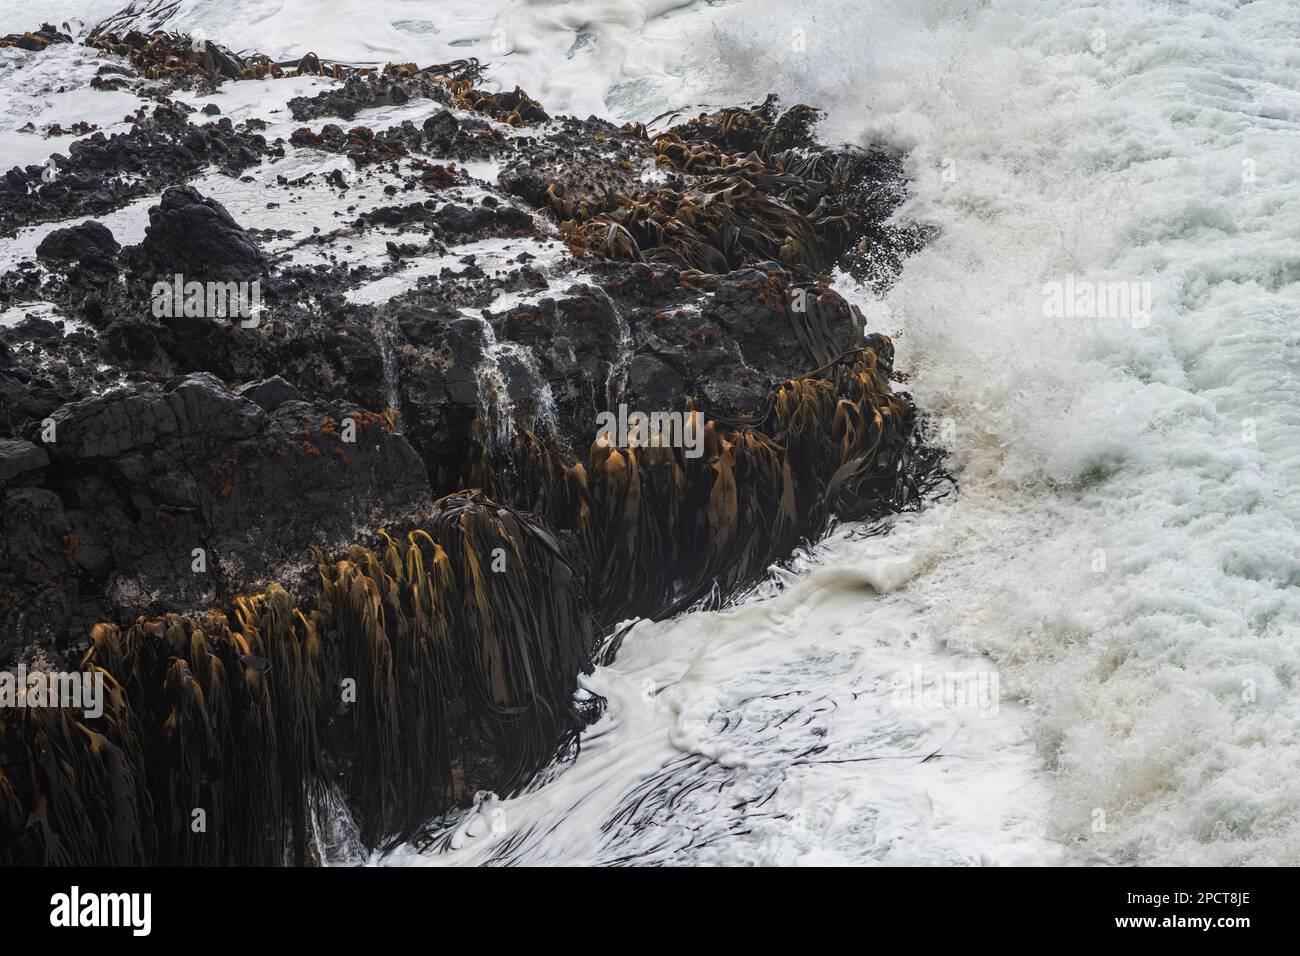 The intertidal zone where the pacific ocean sprays over rocks on the shoreline in New Zealand, kelp adapted to the wave action grows on the rocks. Stock Photo